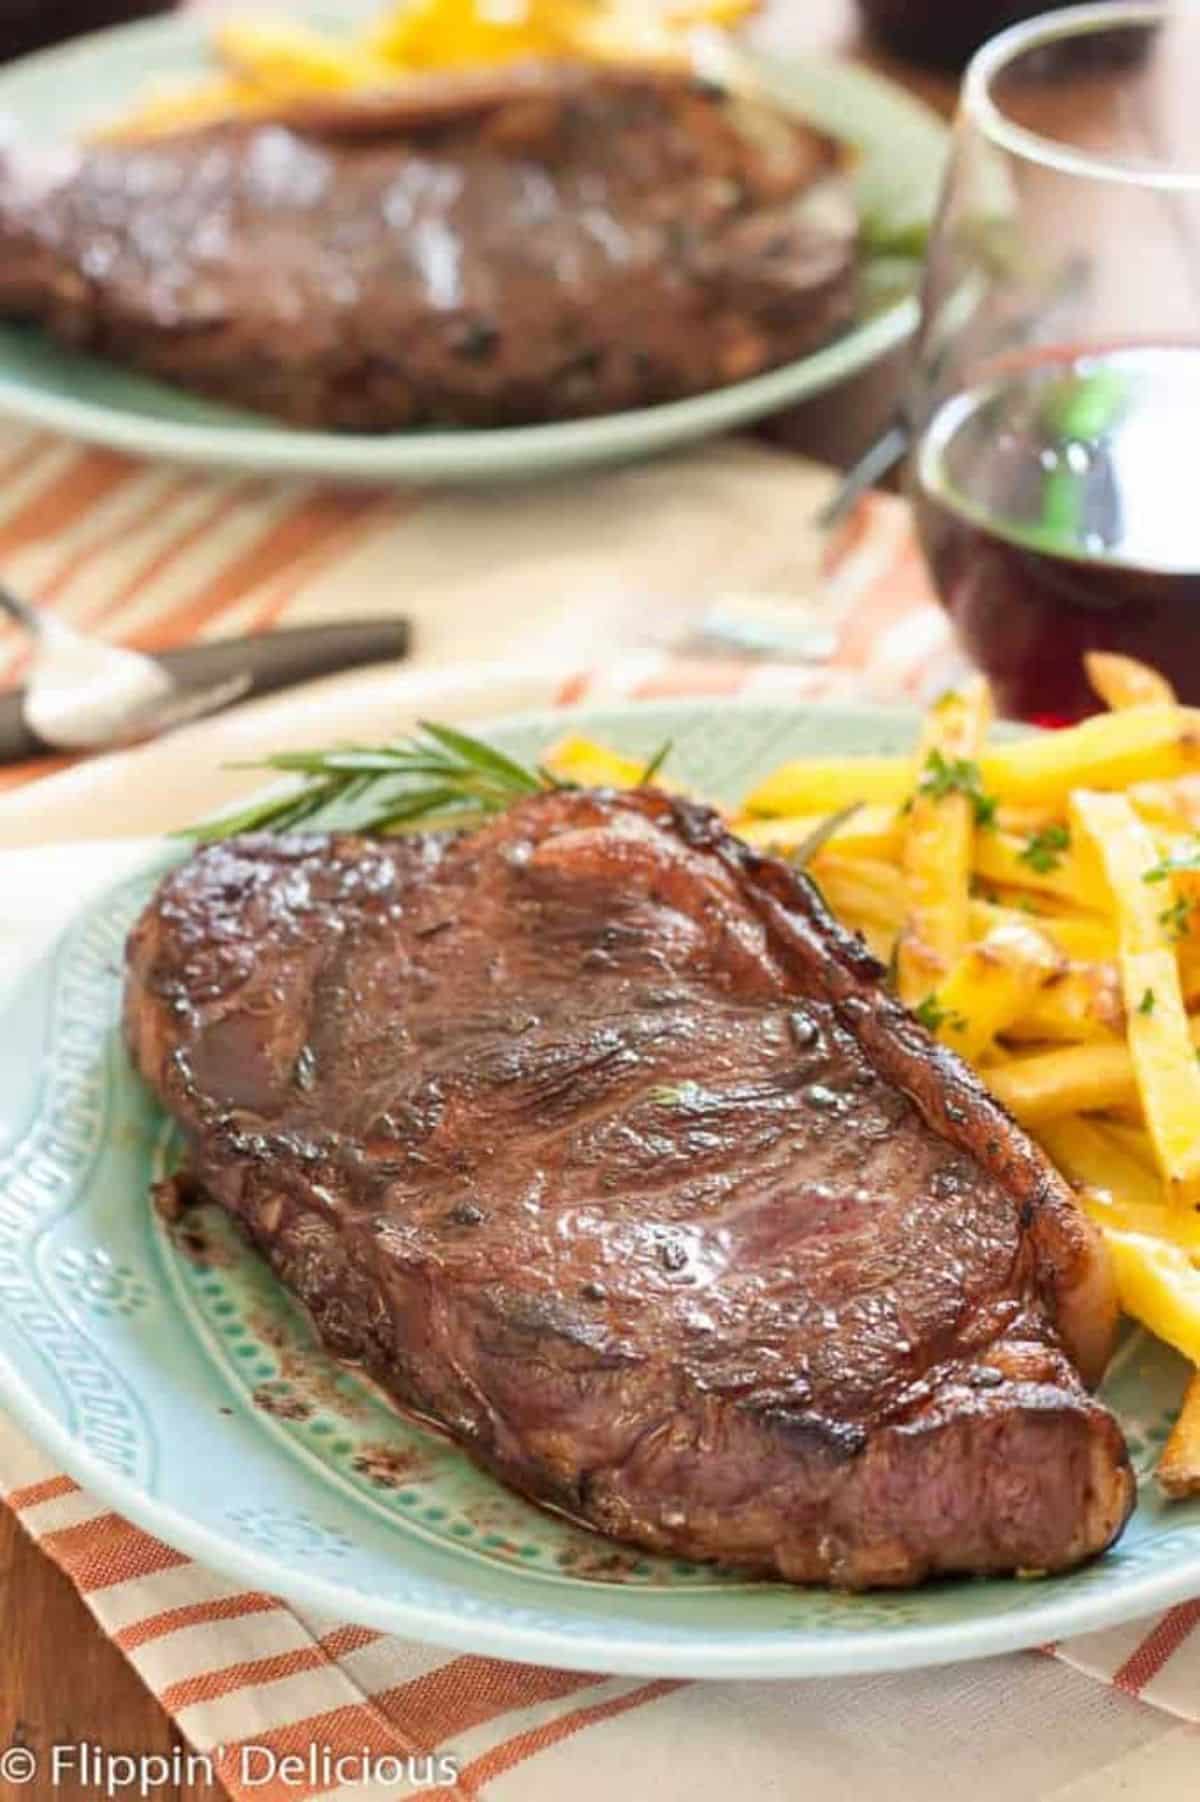 Scrumptious Red Wine Marinated Steak with Baked Garlic and Herb Fries on a green plate.